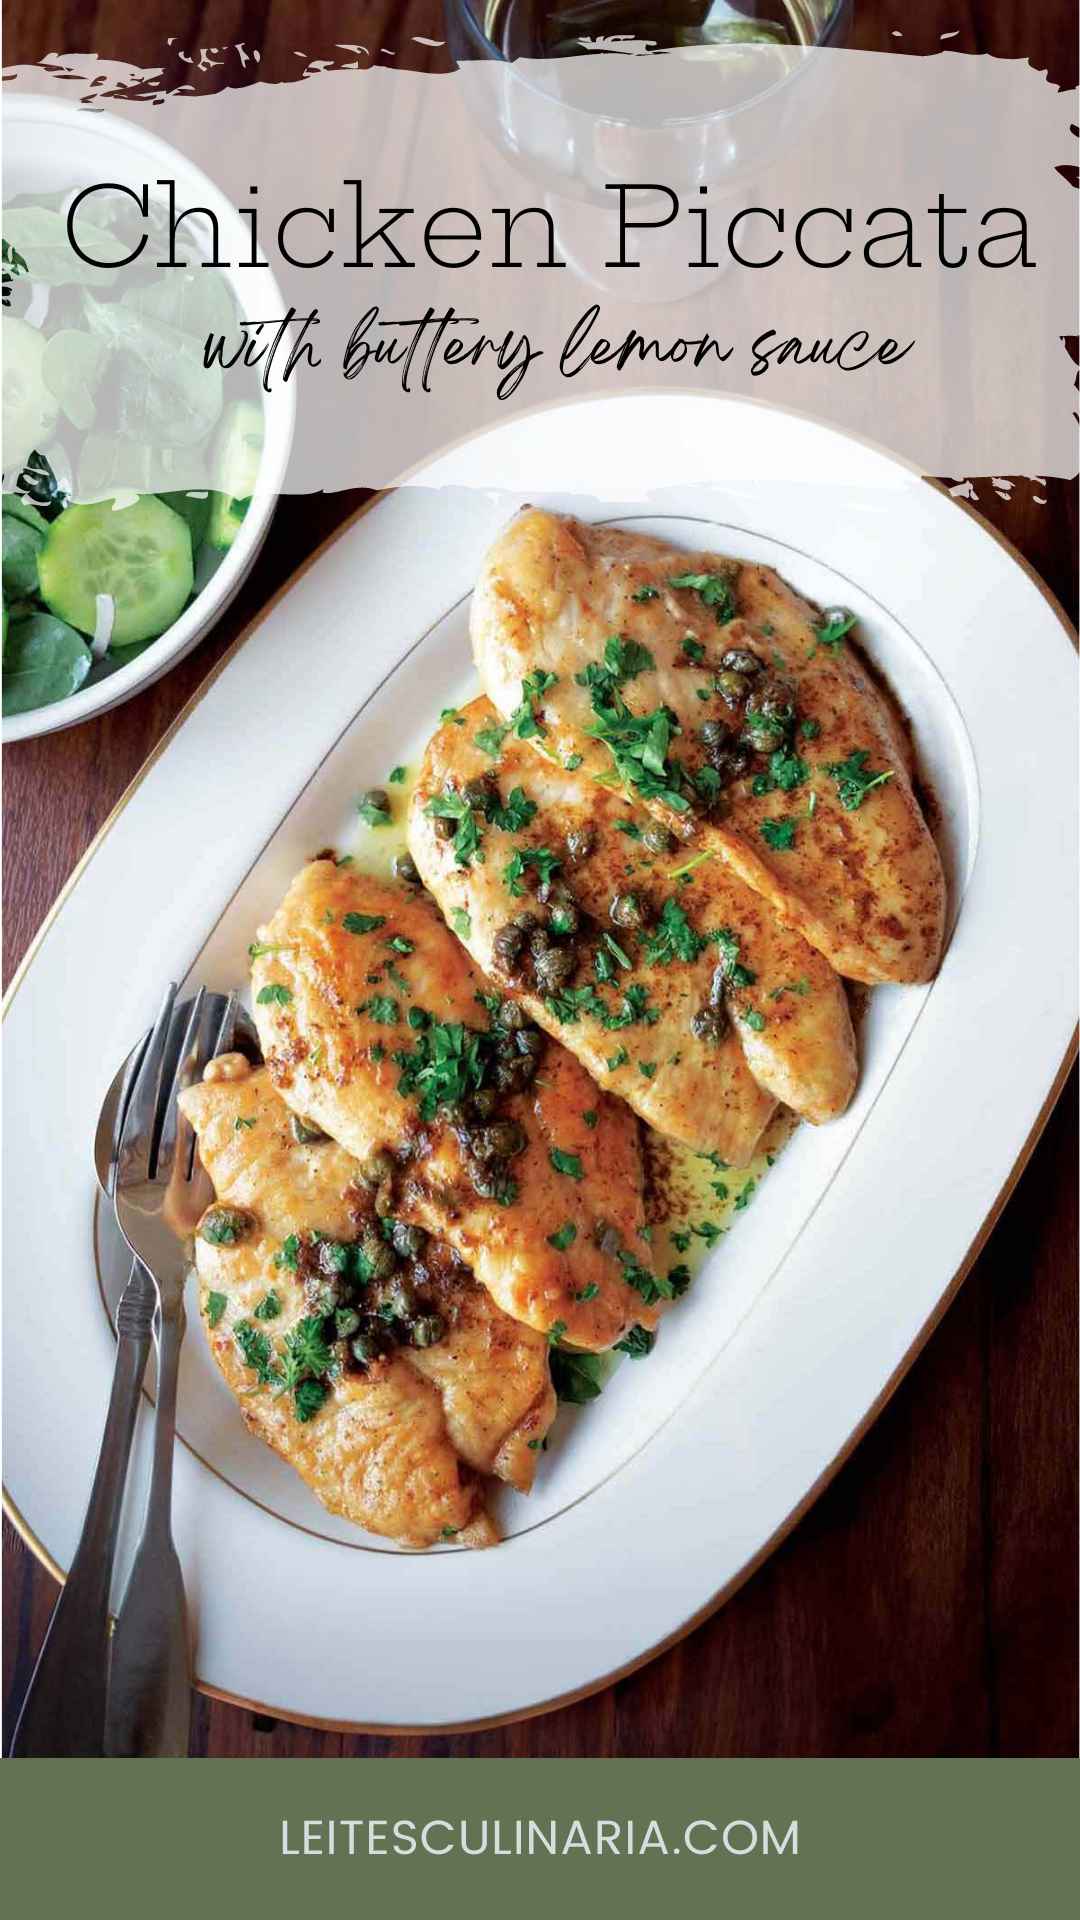 Four chicken cutlets topped with capers, parsley, and butter sauce on a white oval platter.